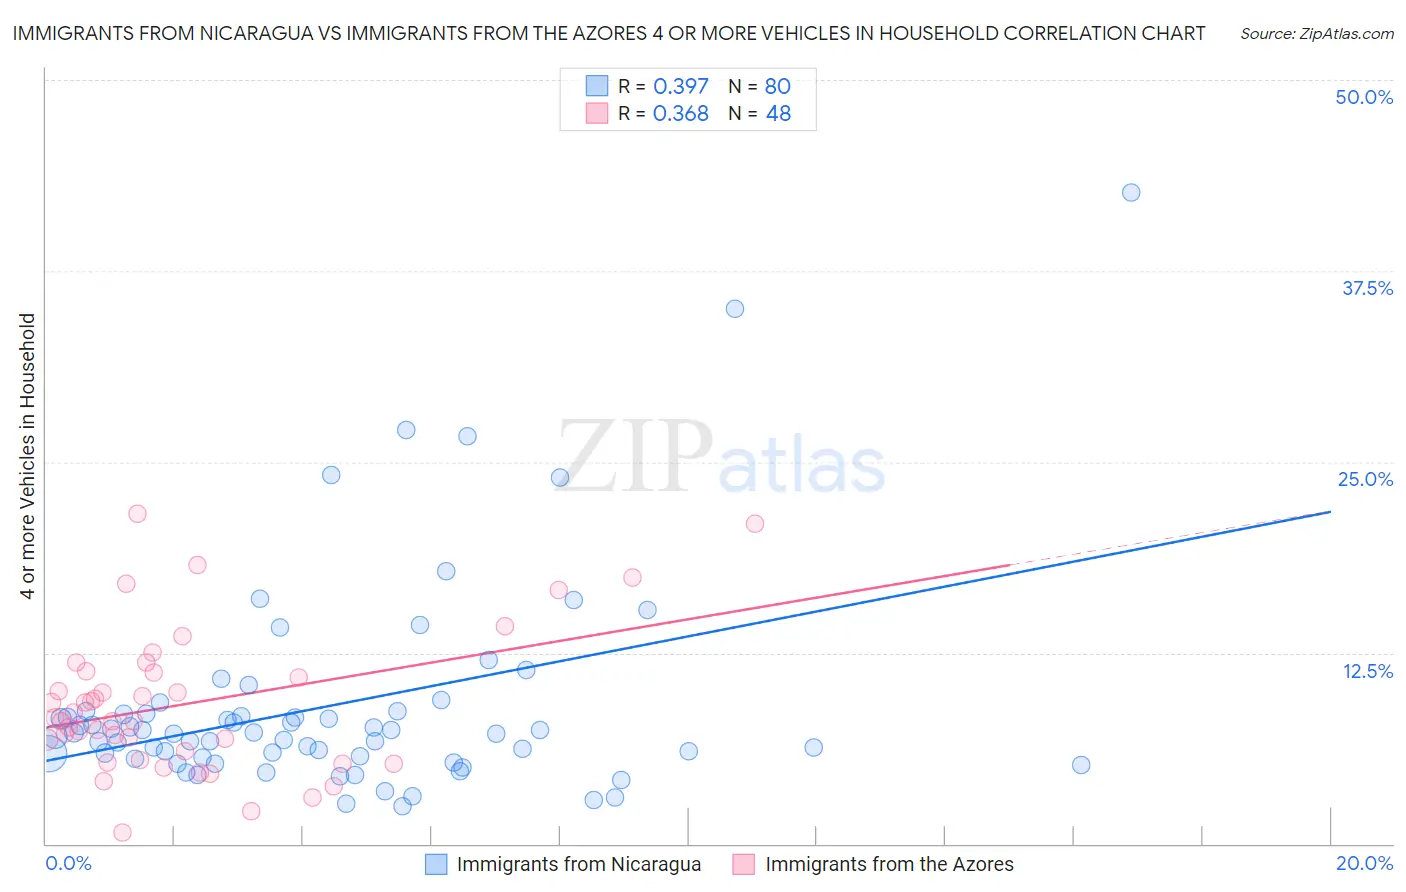 Immigrants from Nicaragua vs Immigrants from the Azores 4 or more Vehicles in Household